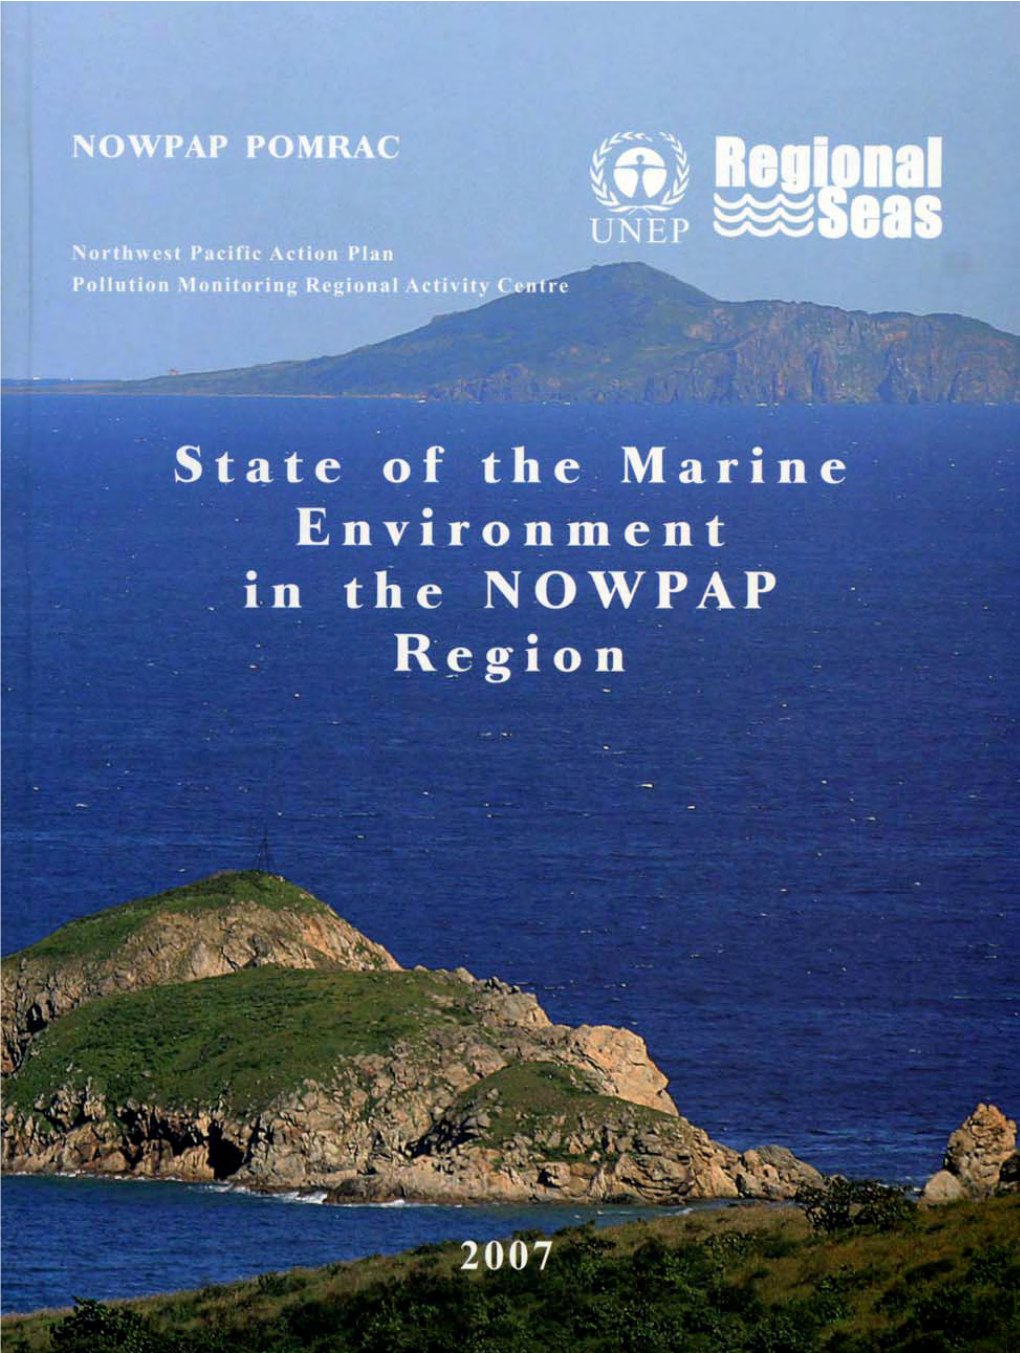 Sate of the Marine Environment in the NOWPAP Region